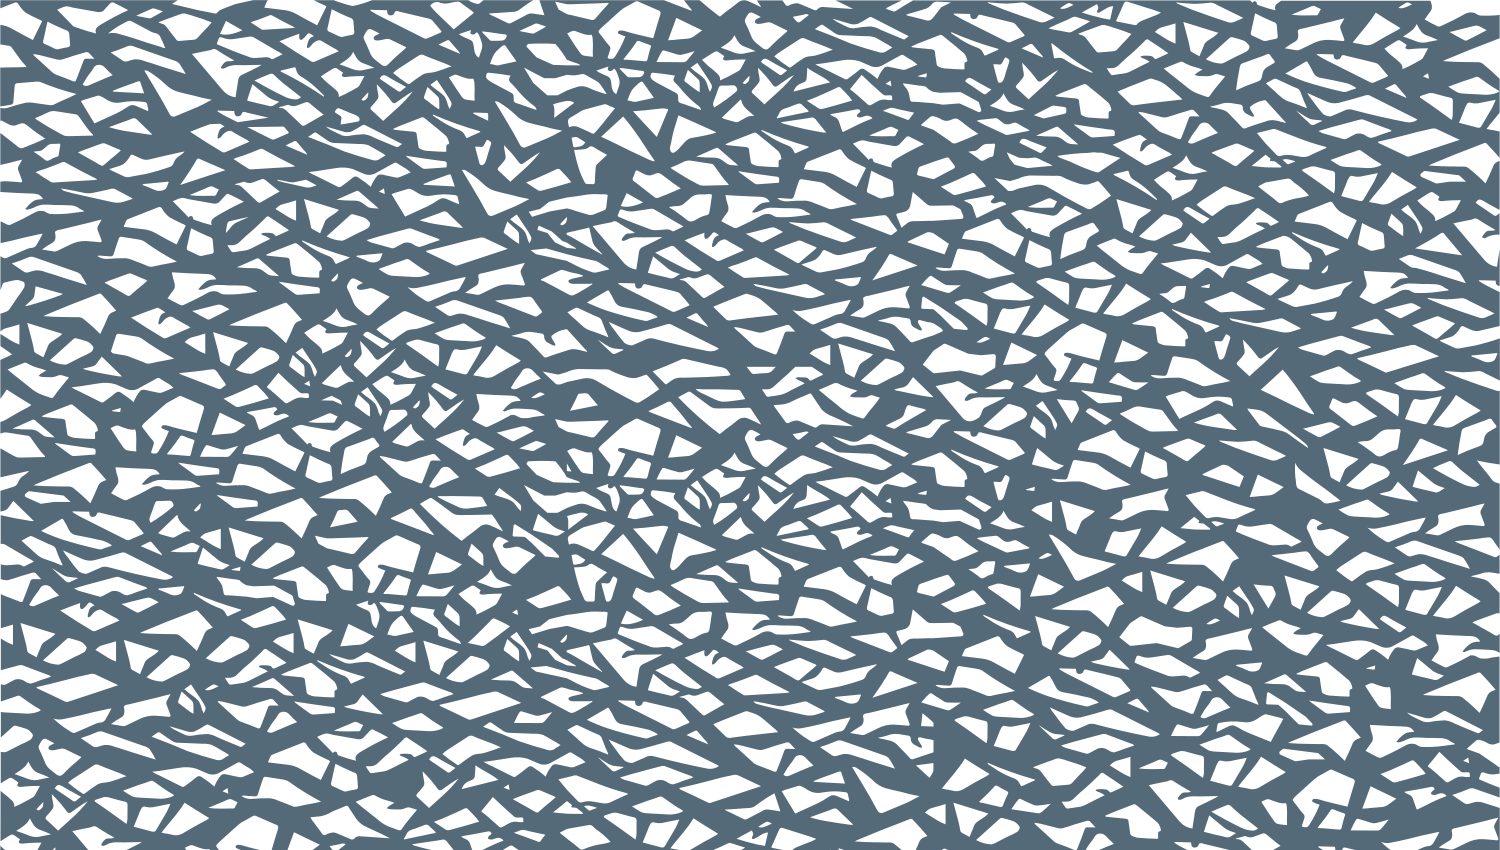 Parasoleil™ Taiga© pattern displayed with a blue color overlay